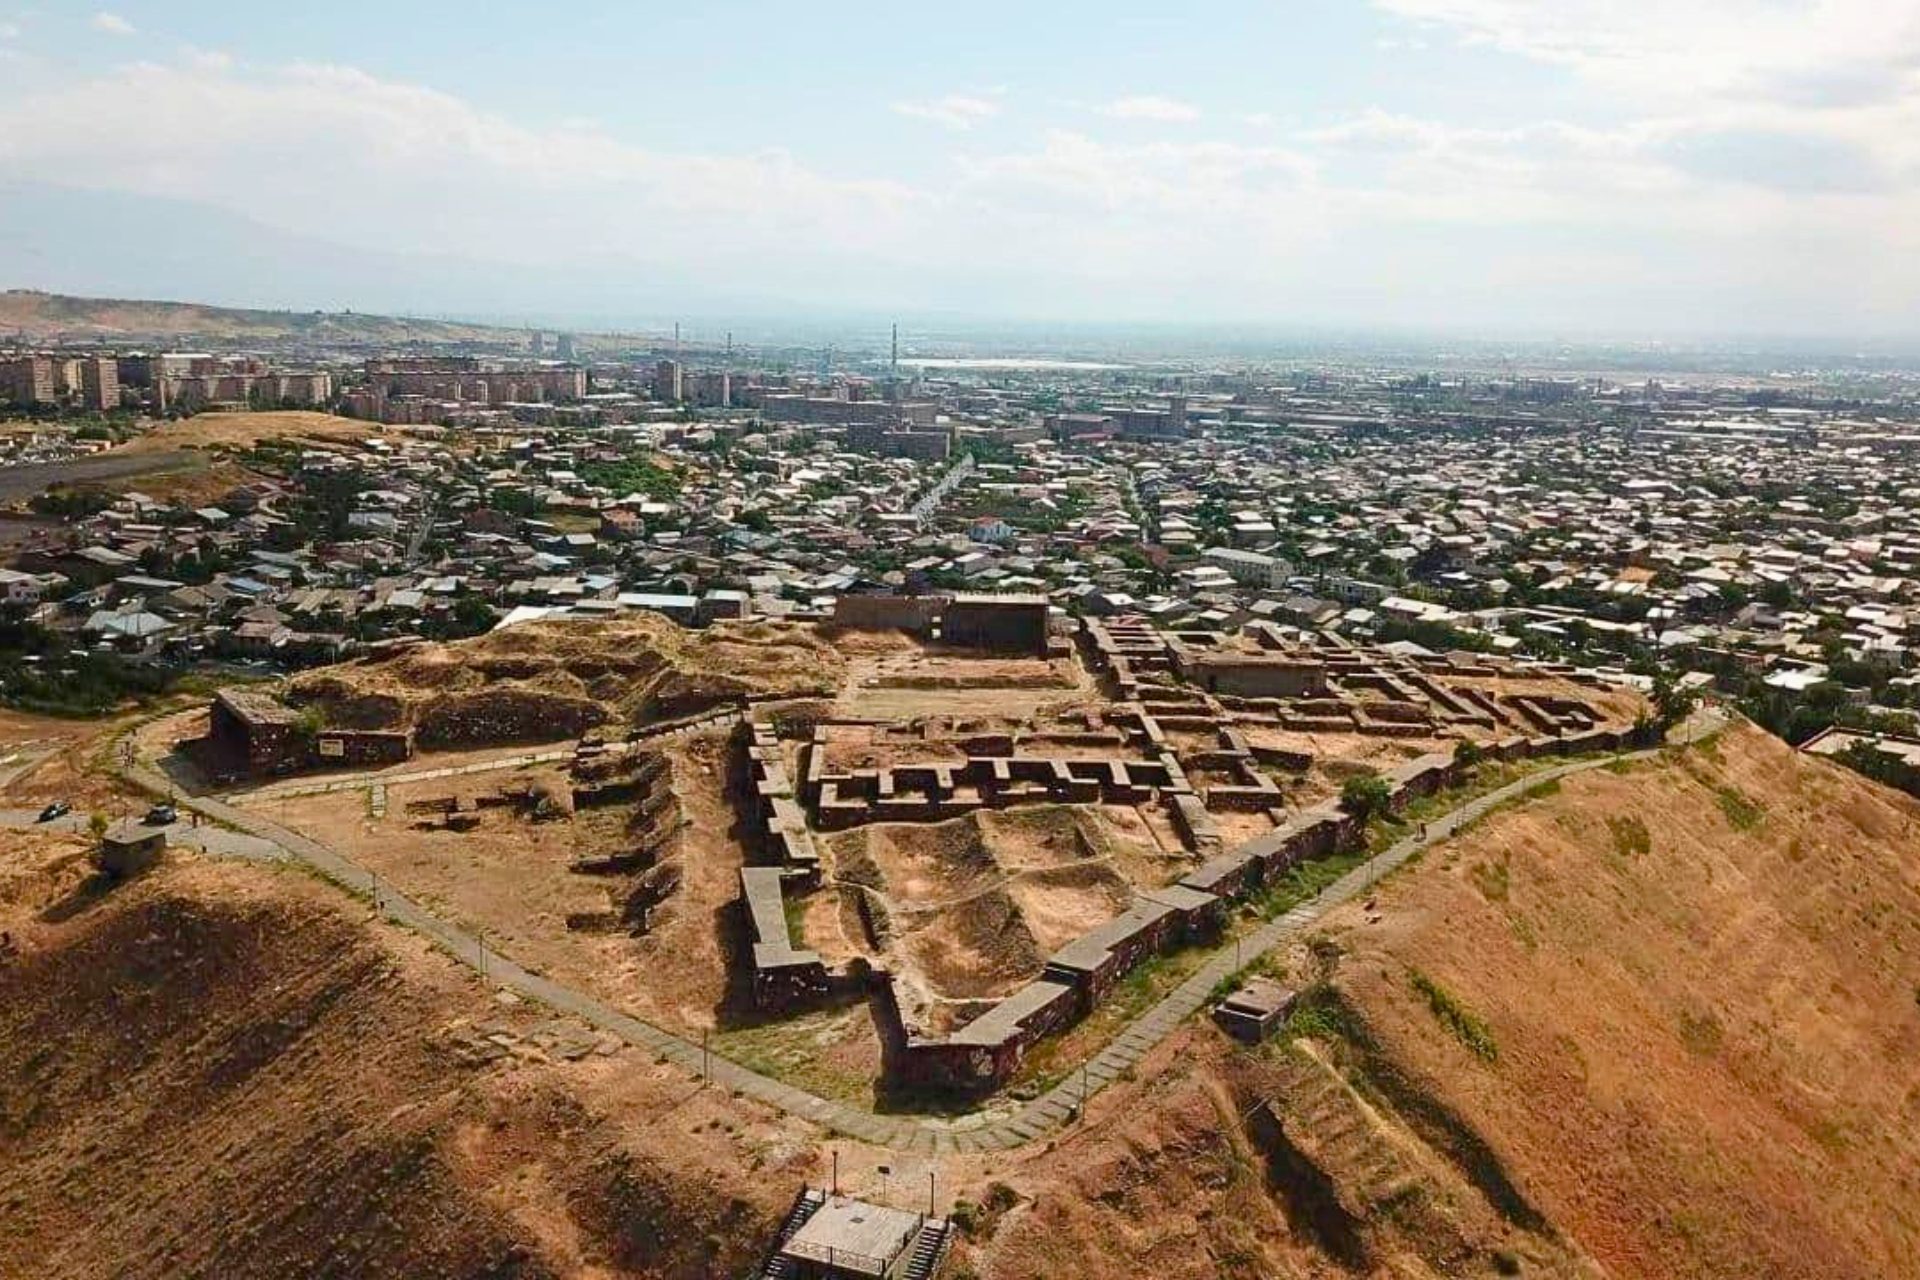 An arial photograph of the ruins of an ancient fortress called Erebuni Fortress, in Yerevan, Armenia.